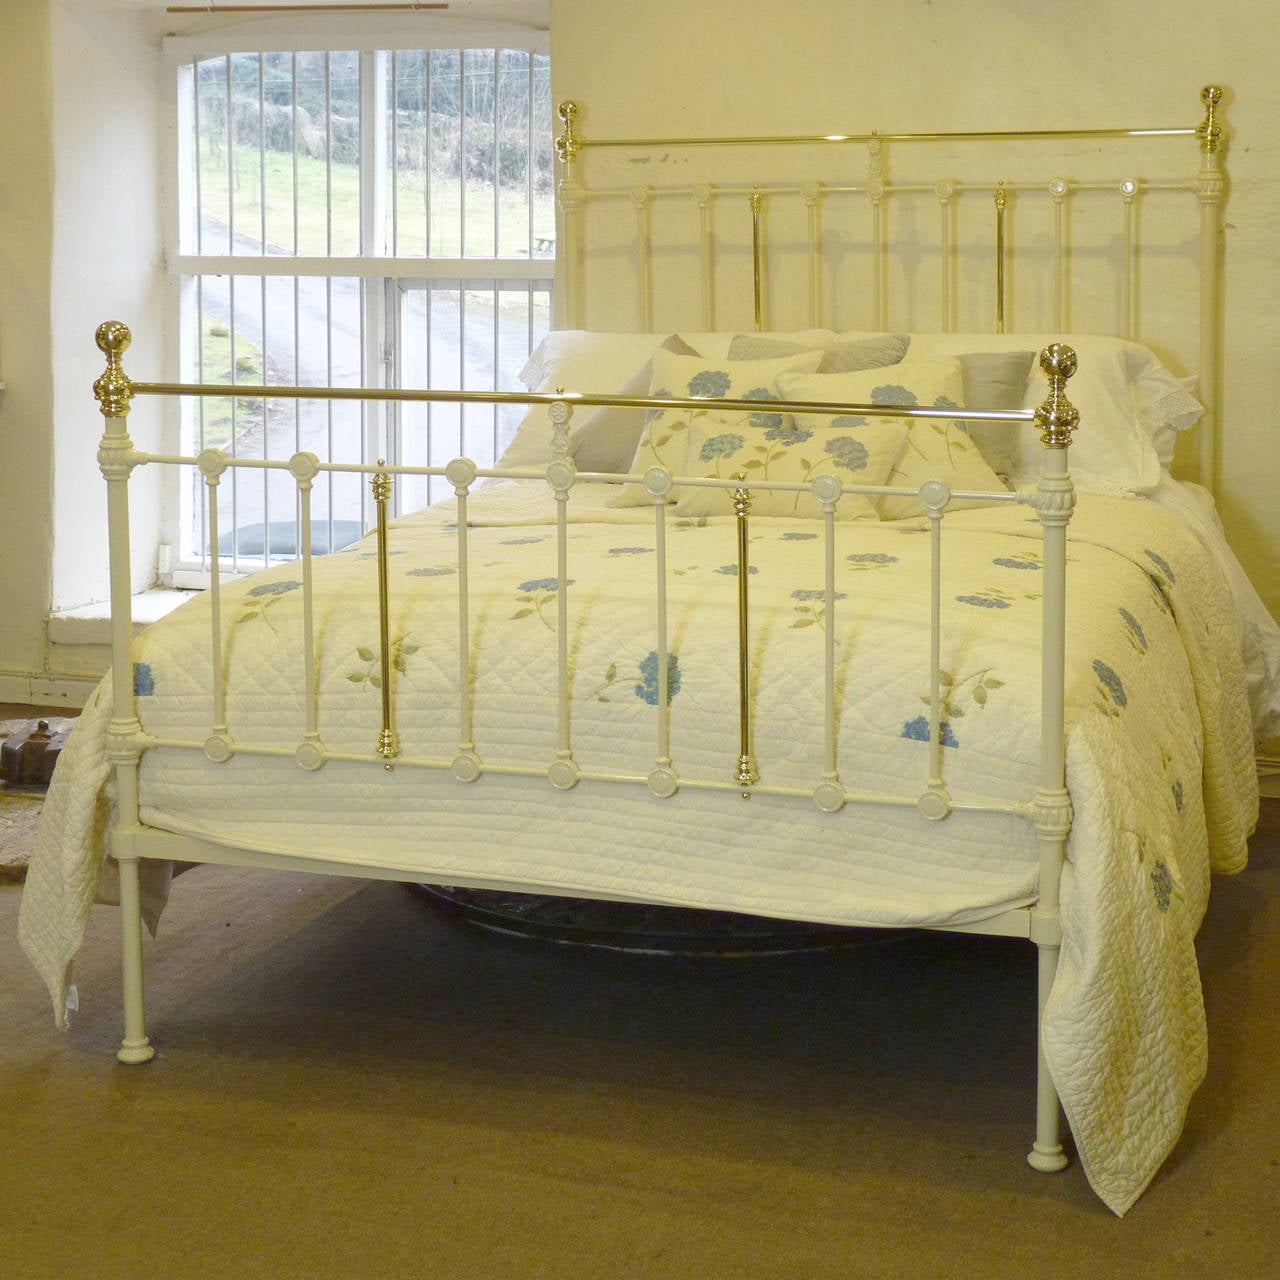 A king-size (American Queen) brass and iron bedstead finished in cream with simple mouldings and straight brass top rails.

This bed accepts a 5 ft wide king-size base and mattress set.

The price is for the bedstead alone. The base, mattress,